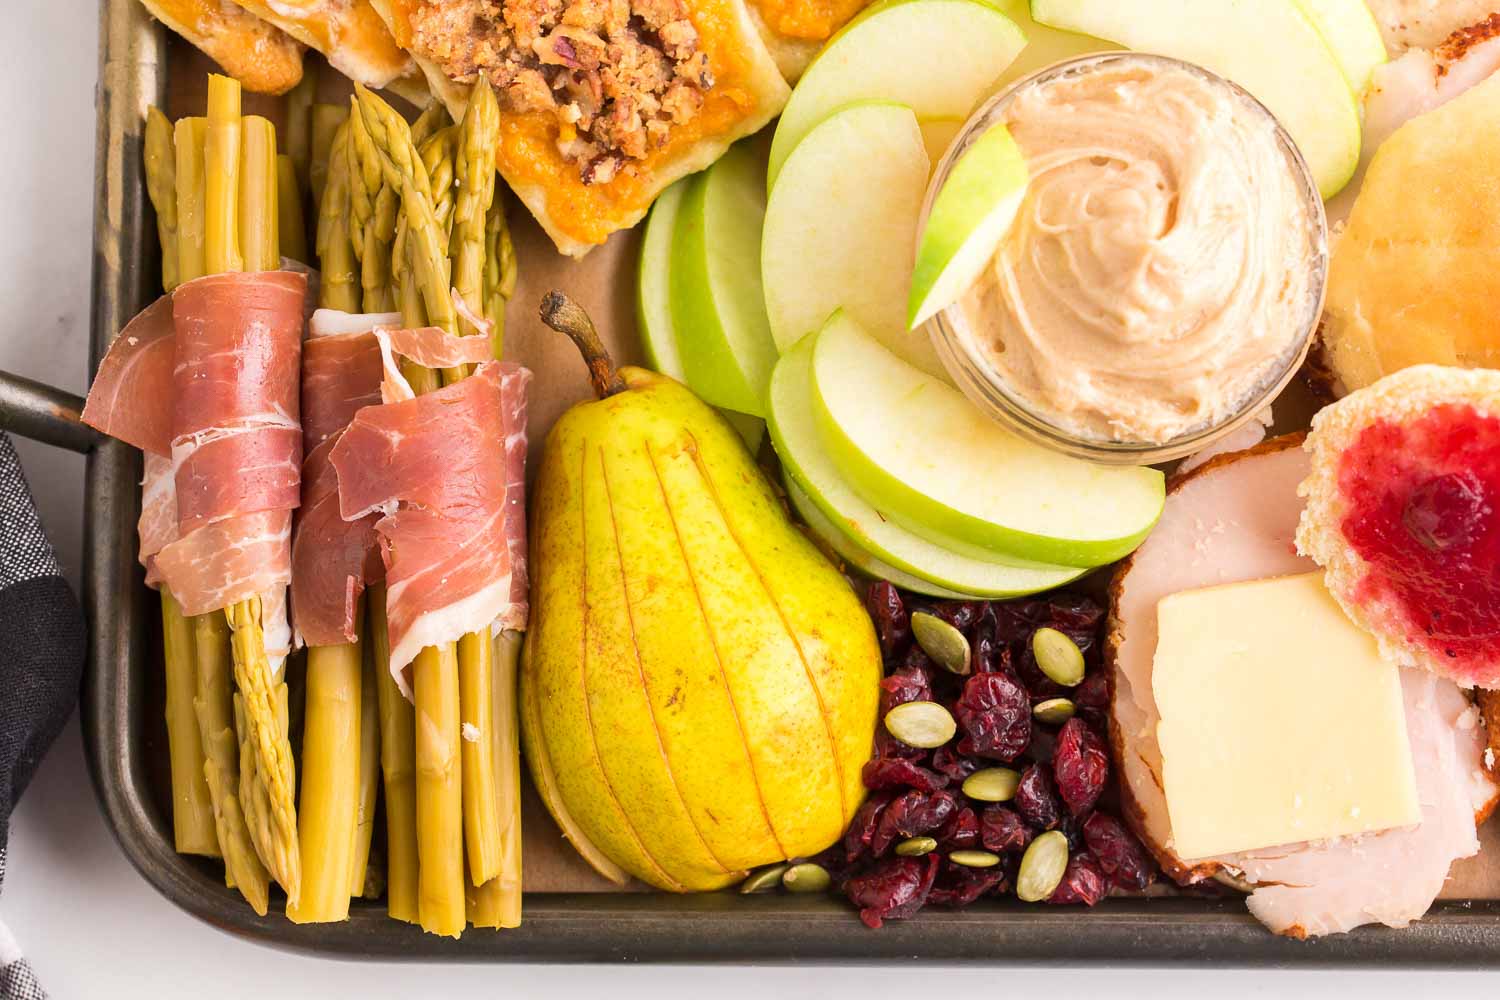 Sweet potato pastries, meat wrapped asparagus, cut pear, cut apples and apple dip, nuts, and a roll with turkey and jelly on it.